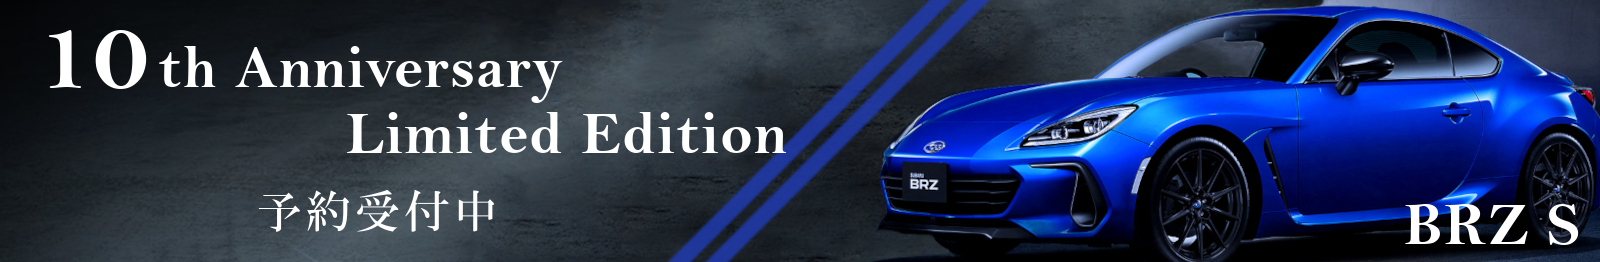 BRZ S 10th Anniversary Limited Edition